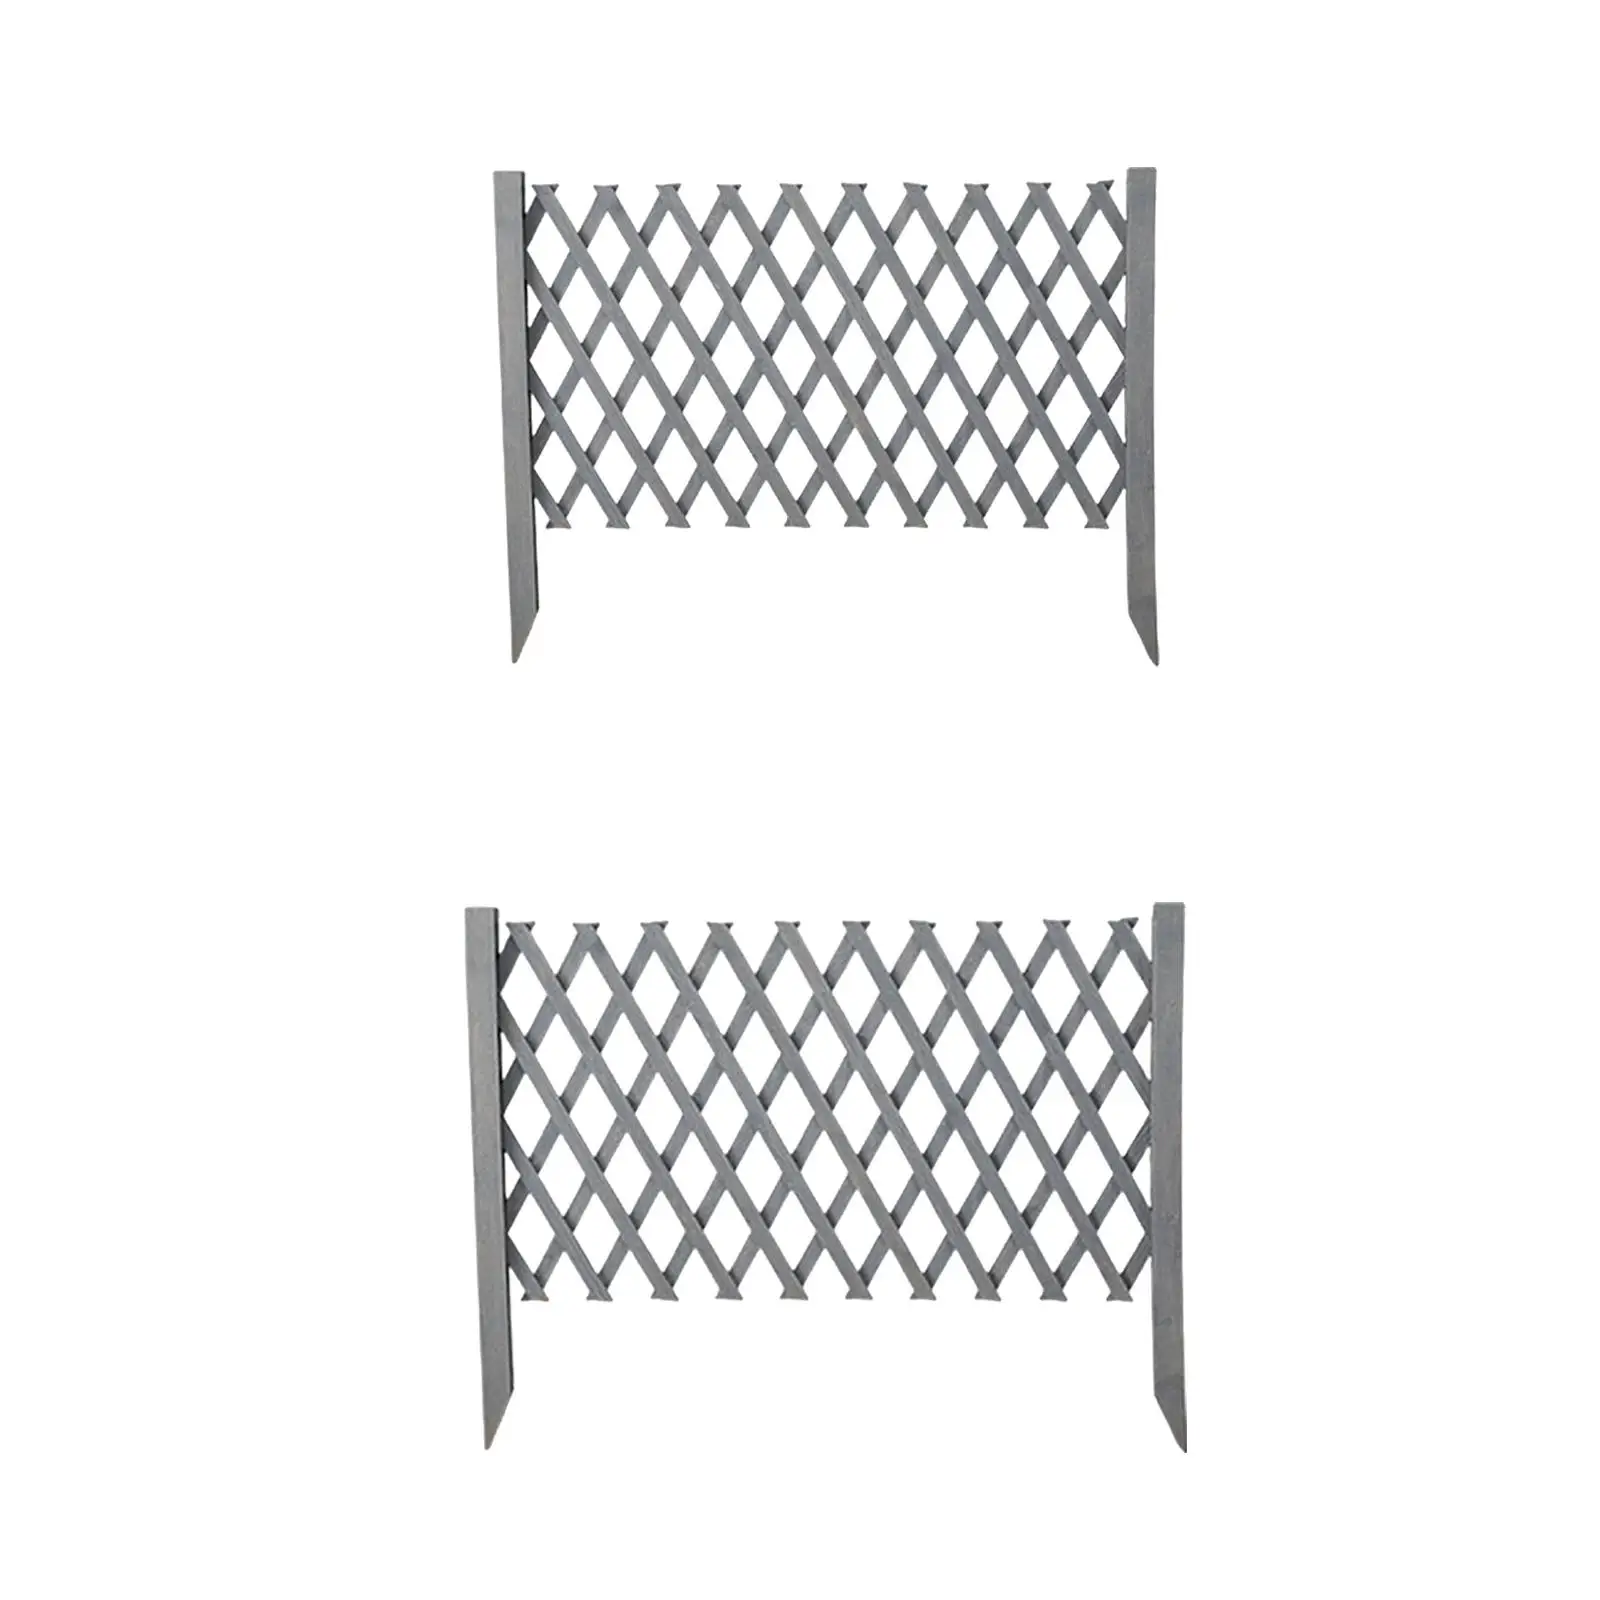 Garden Trellis Fence Indoor Outdoor Wood Fence Partition Retractable Door Expandable Wooden Fence for Stairs Restaurant Lawn